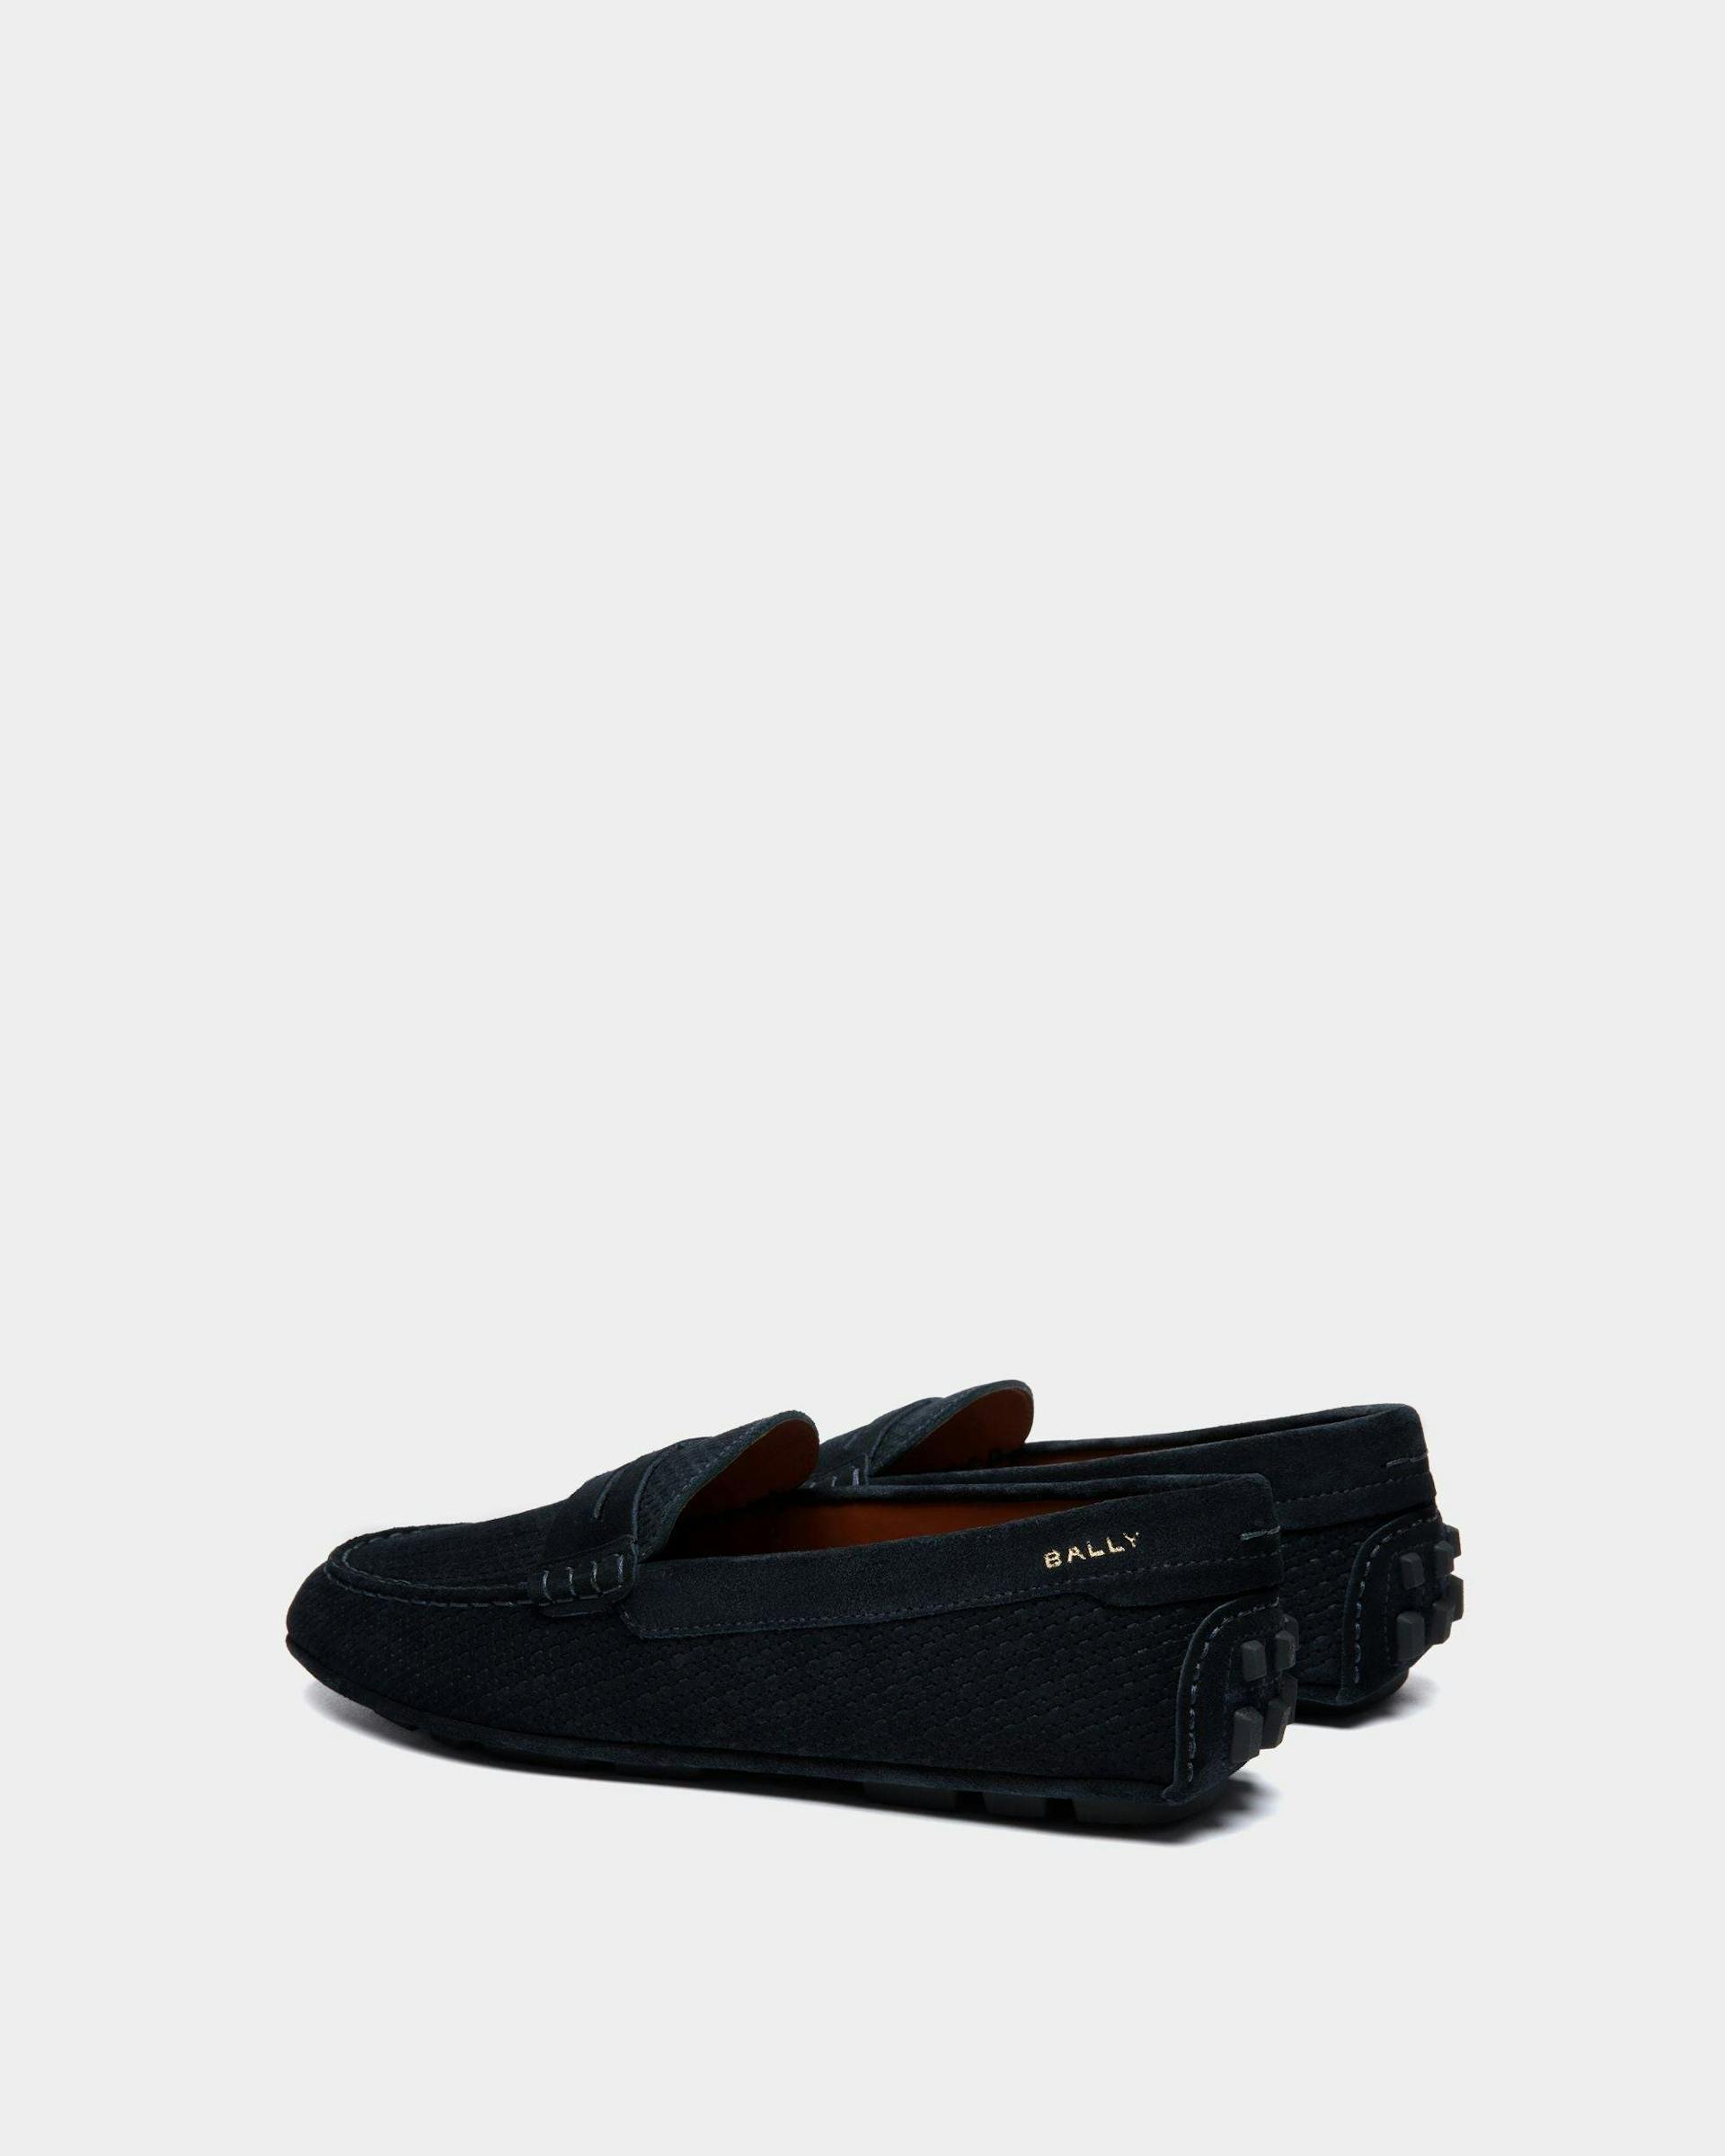 Men's Kerbs Driver in Embossed Suede | Bally | Still Life 3/4 Back